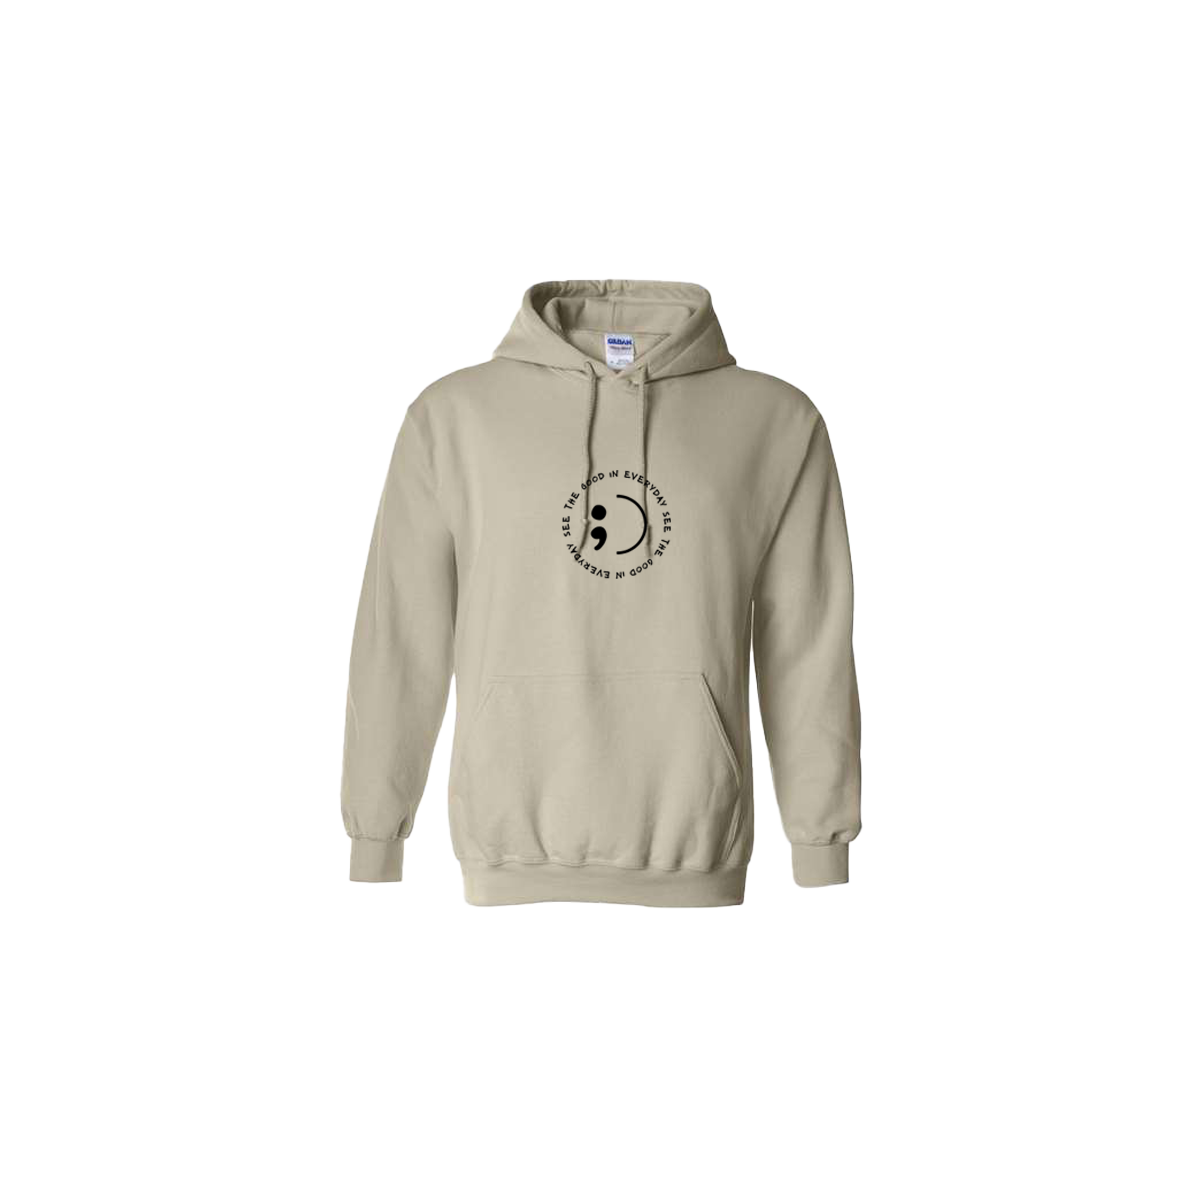 See the Good in Everyday Embroidered Beige Hoodie - Mental Health Awareness Clothing